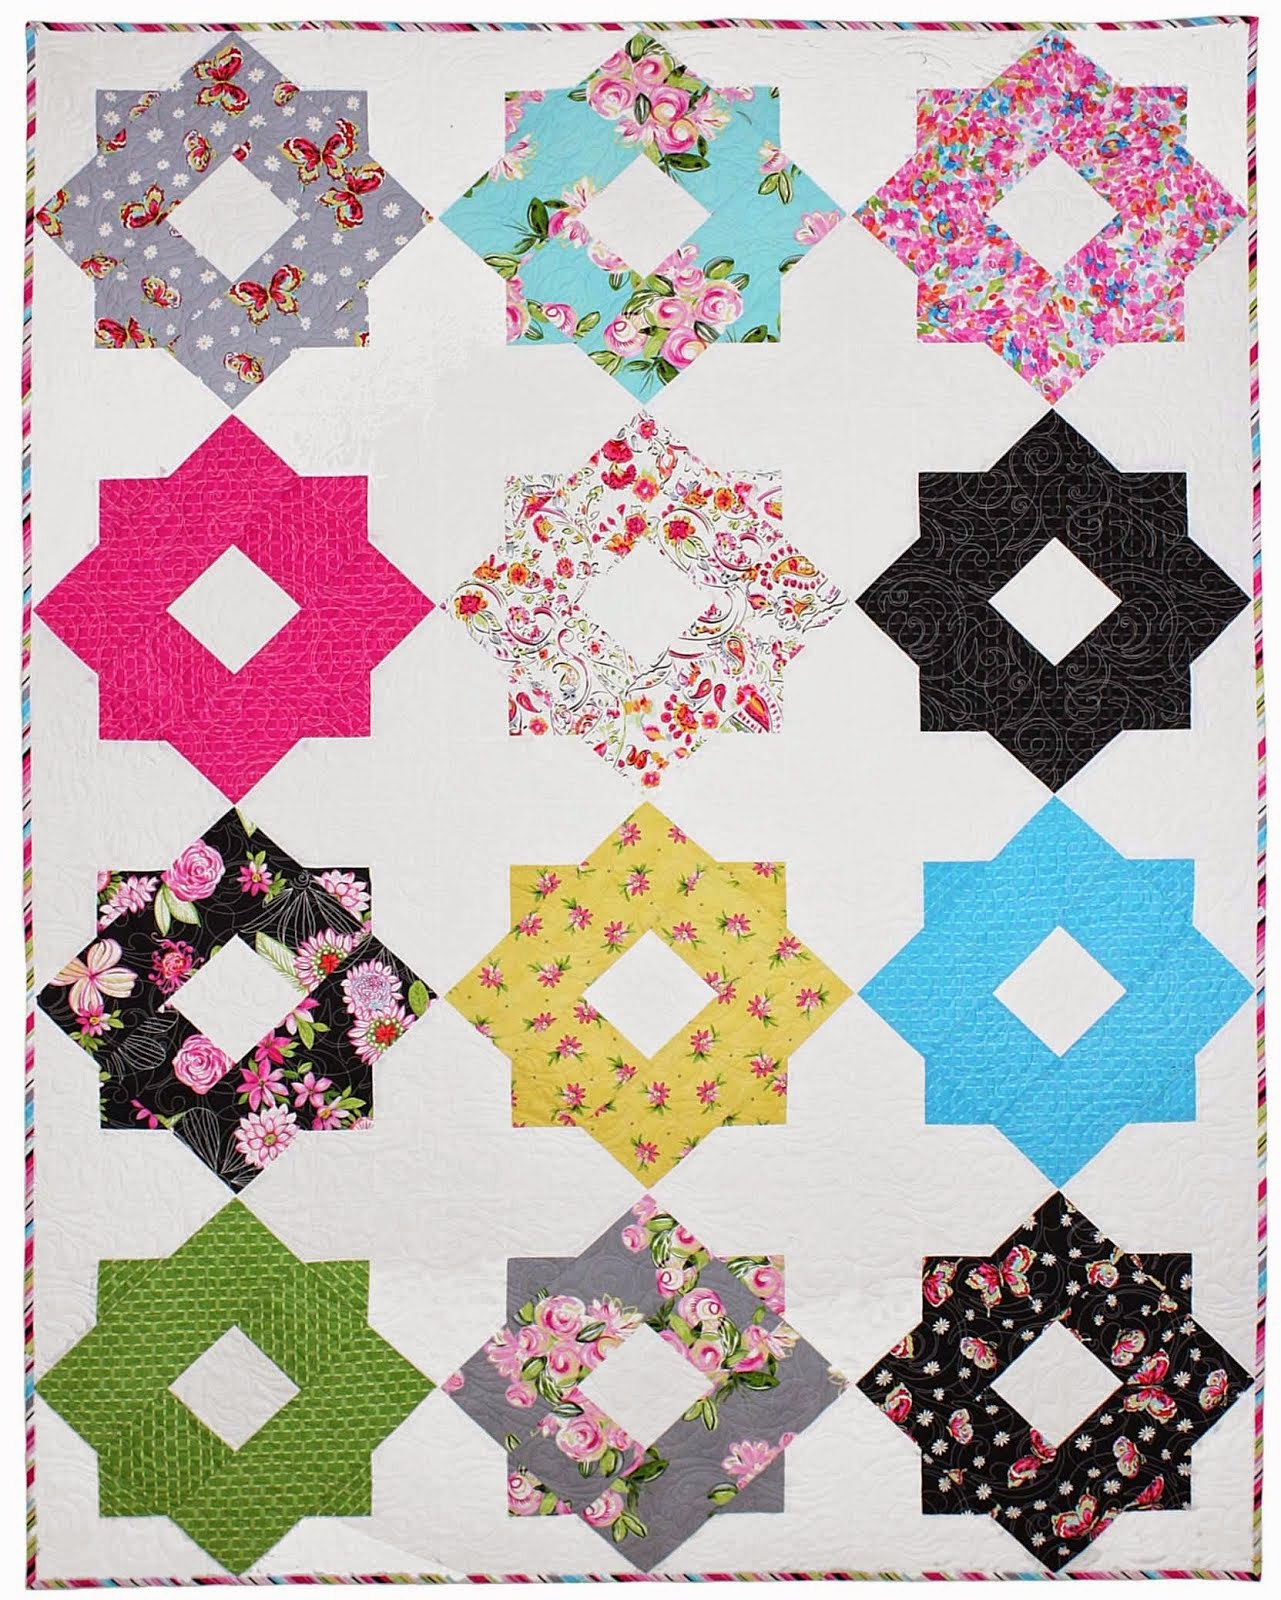 Quilt Inspiration: Japanese quilts